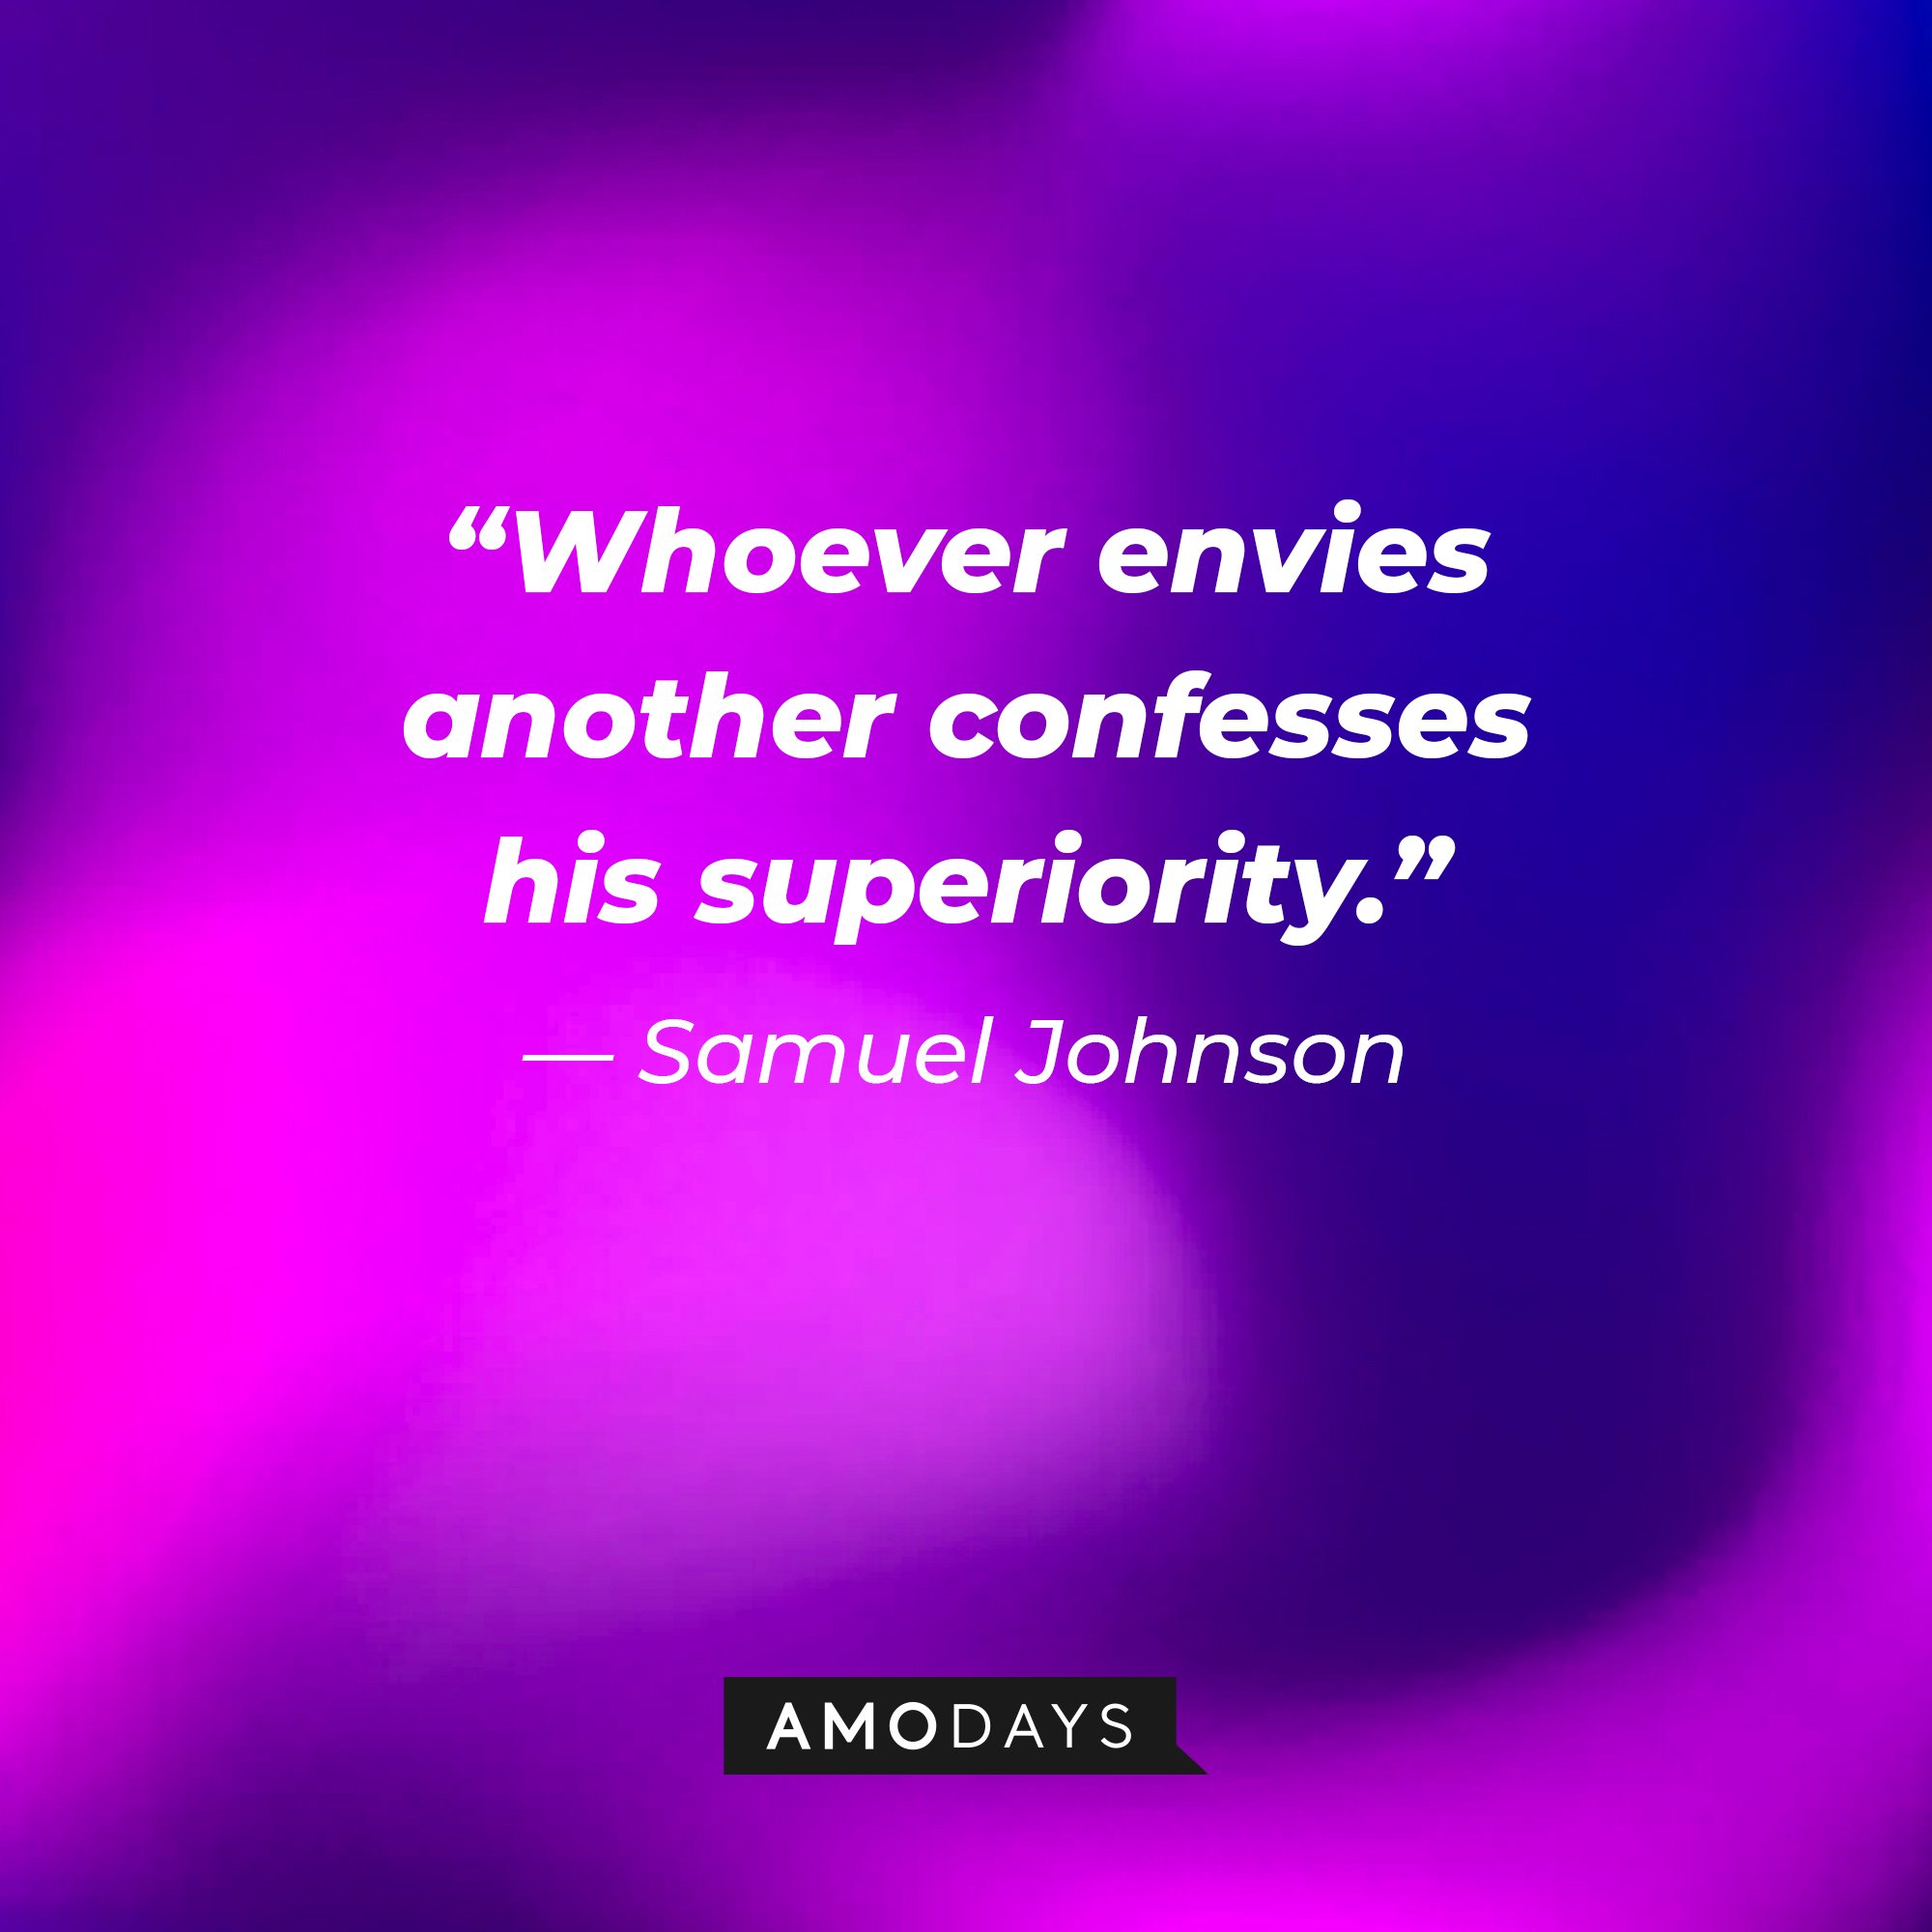  Samuel Johnson's quote: “Whoever envies another confesses his superiority.” | Image: AmoDays